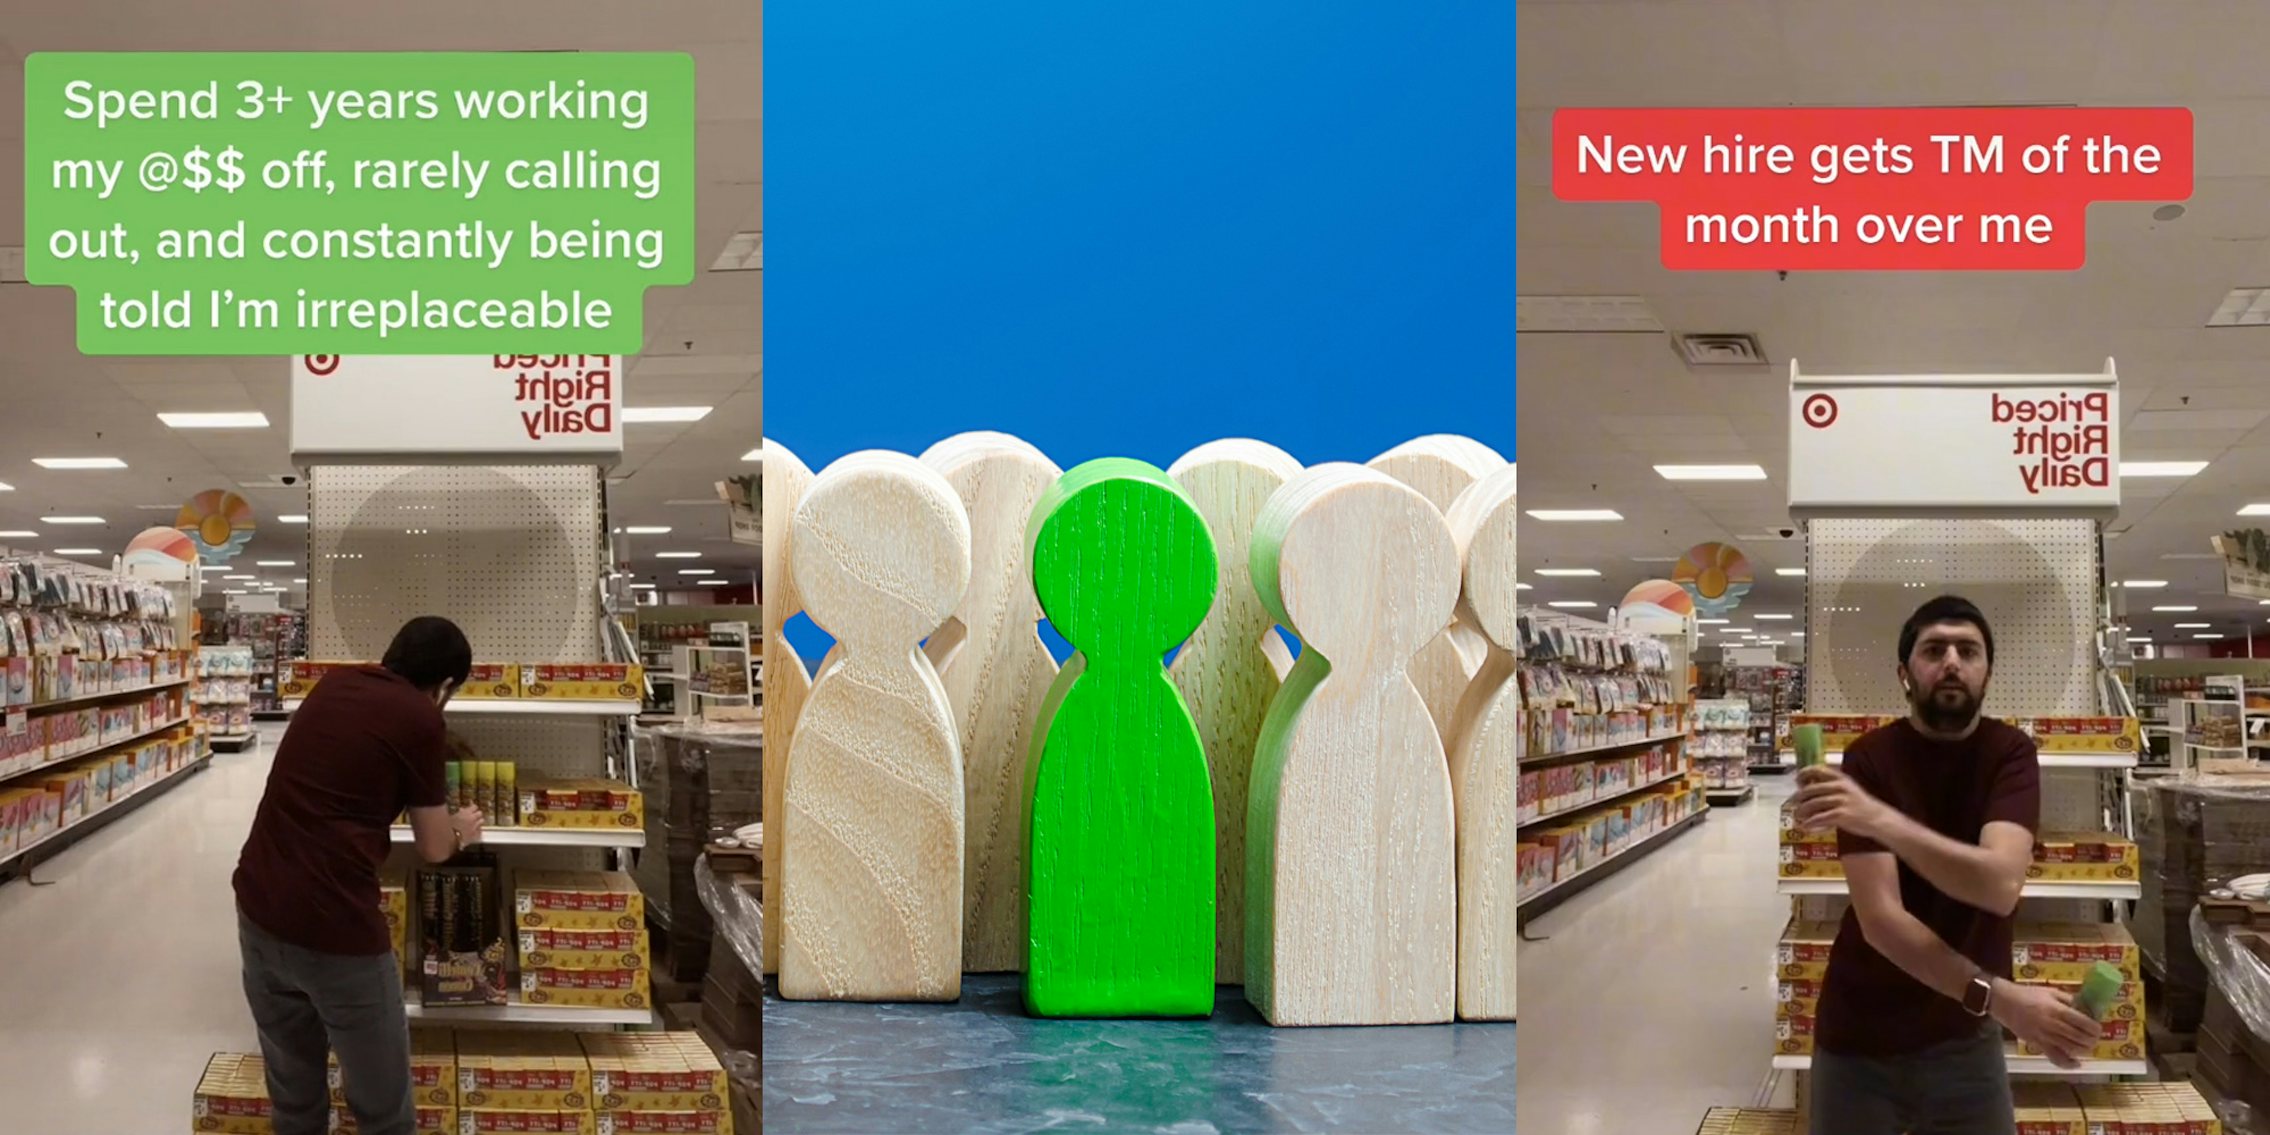 Target employee stocking endcap shelves caption 'Spend 3+ years working my @$$ off, rarely calling out, and constantly being told I'm irreplaceable' (l) wooden figures on table with blue background center wooden figure stands out green (c) Target employee dancing at endcap while stocking caption 'New hire gets TM of the month over me' (r)